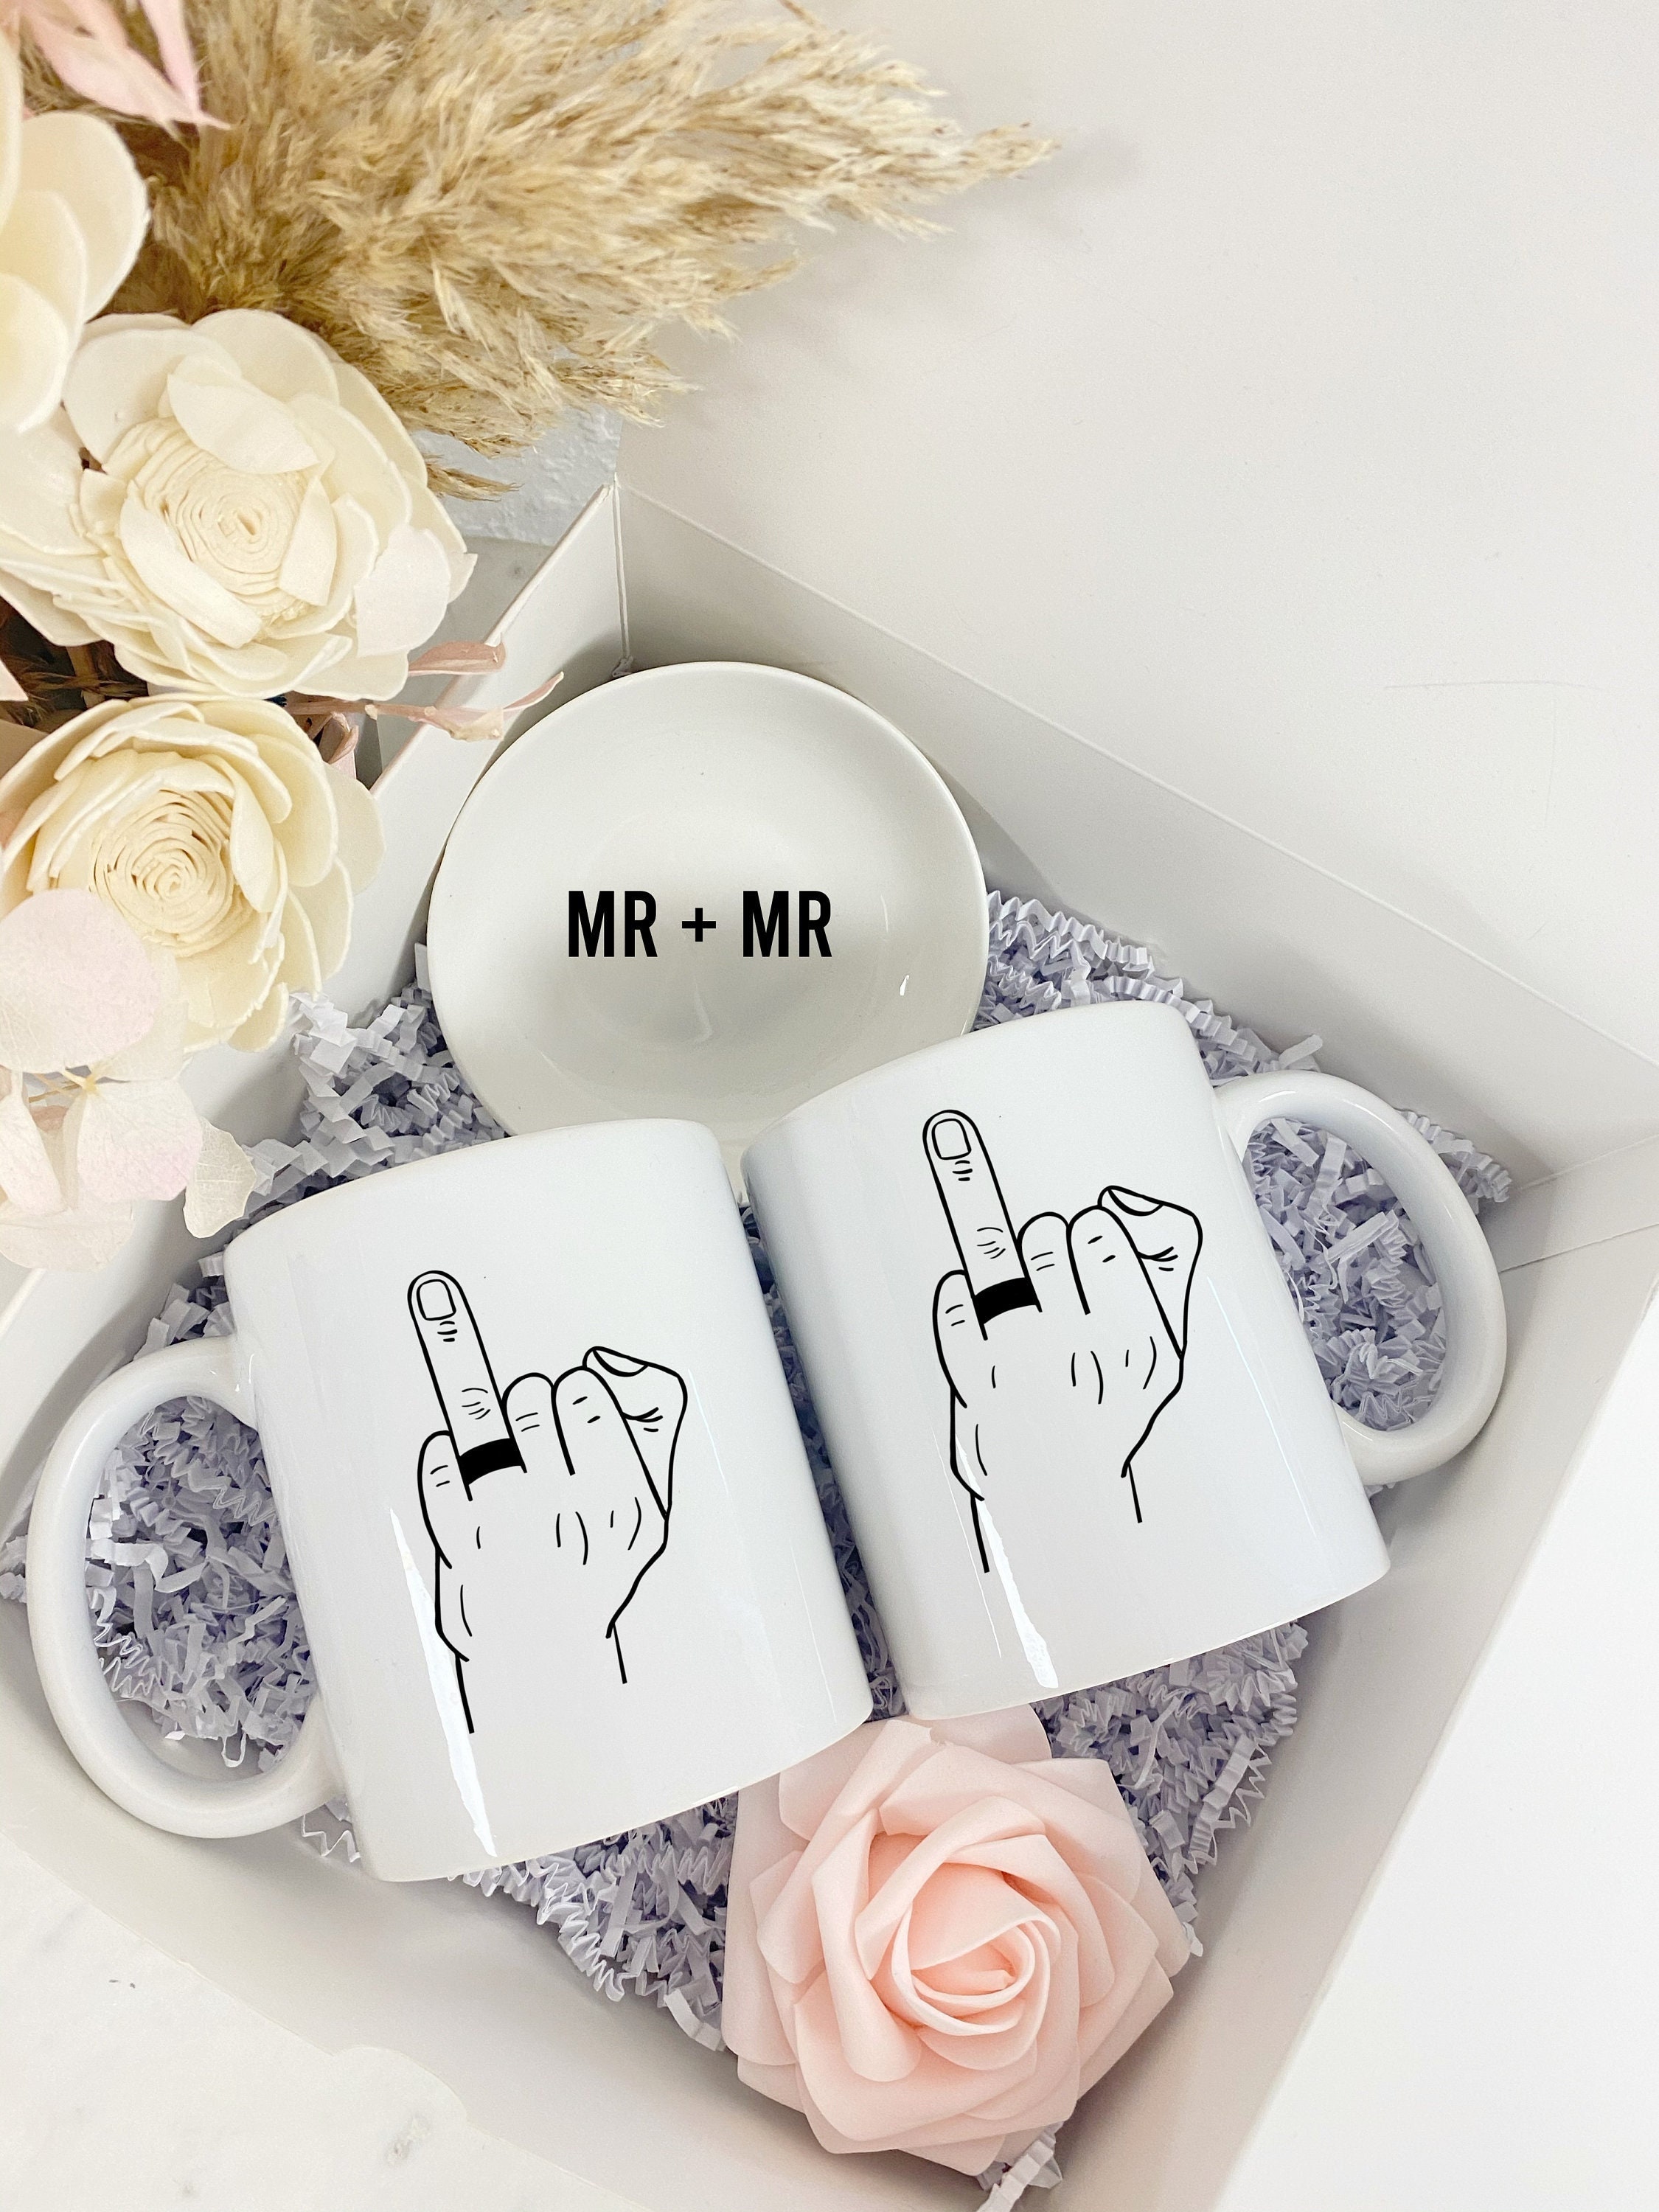 21 Engagement Gift Groom Ideas to Surprise him on his DDay of 2021